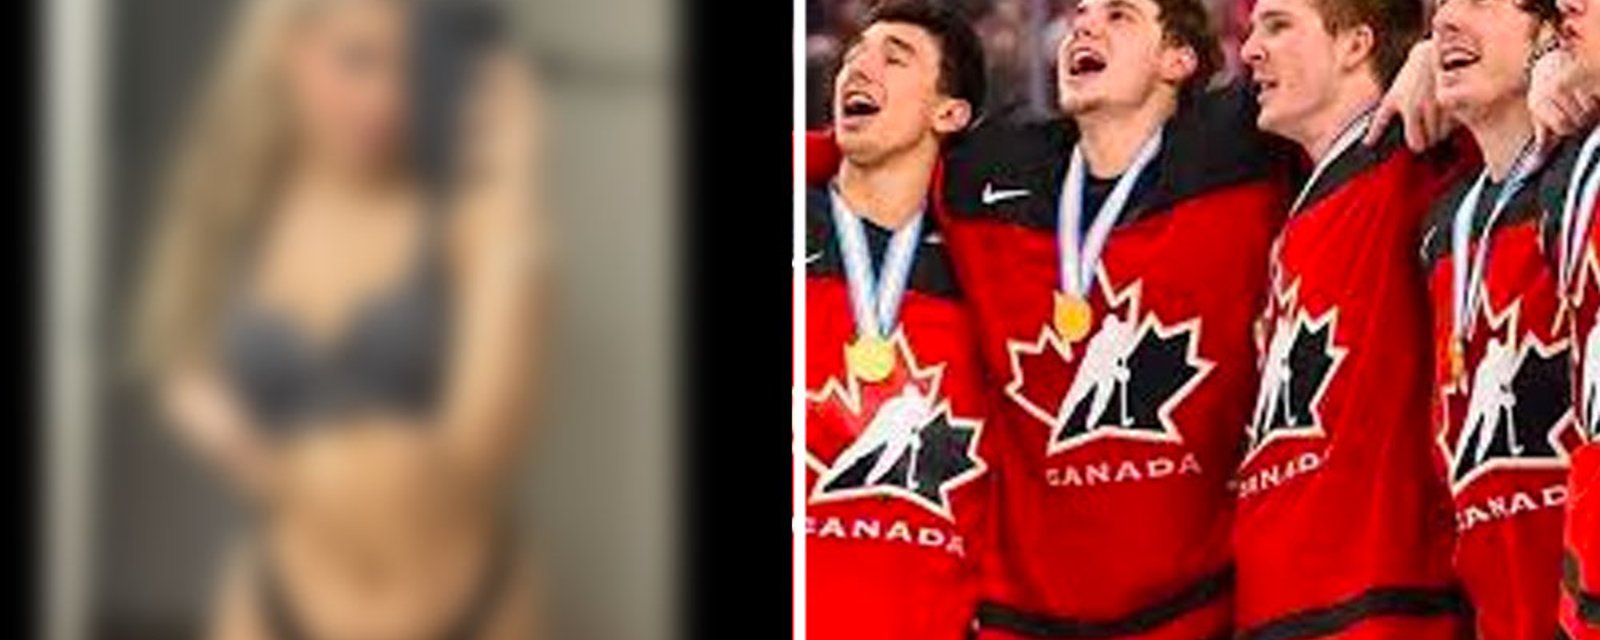 Full video and text message exchange between woman and one of the 5 World Juniors players